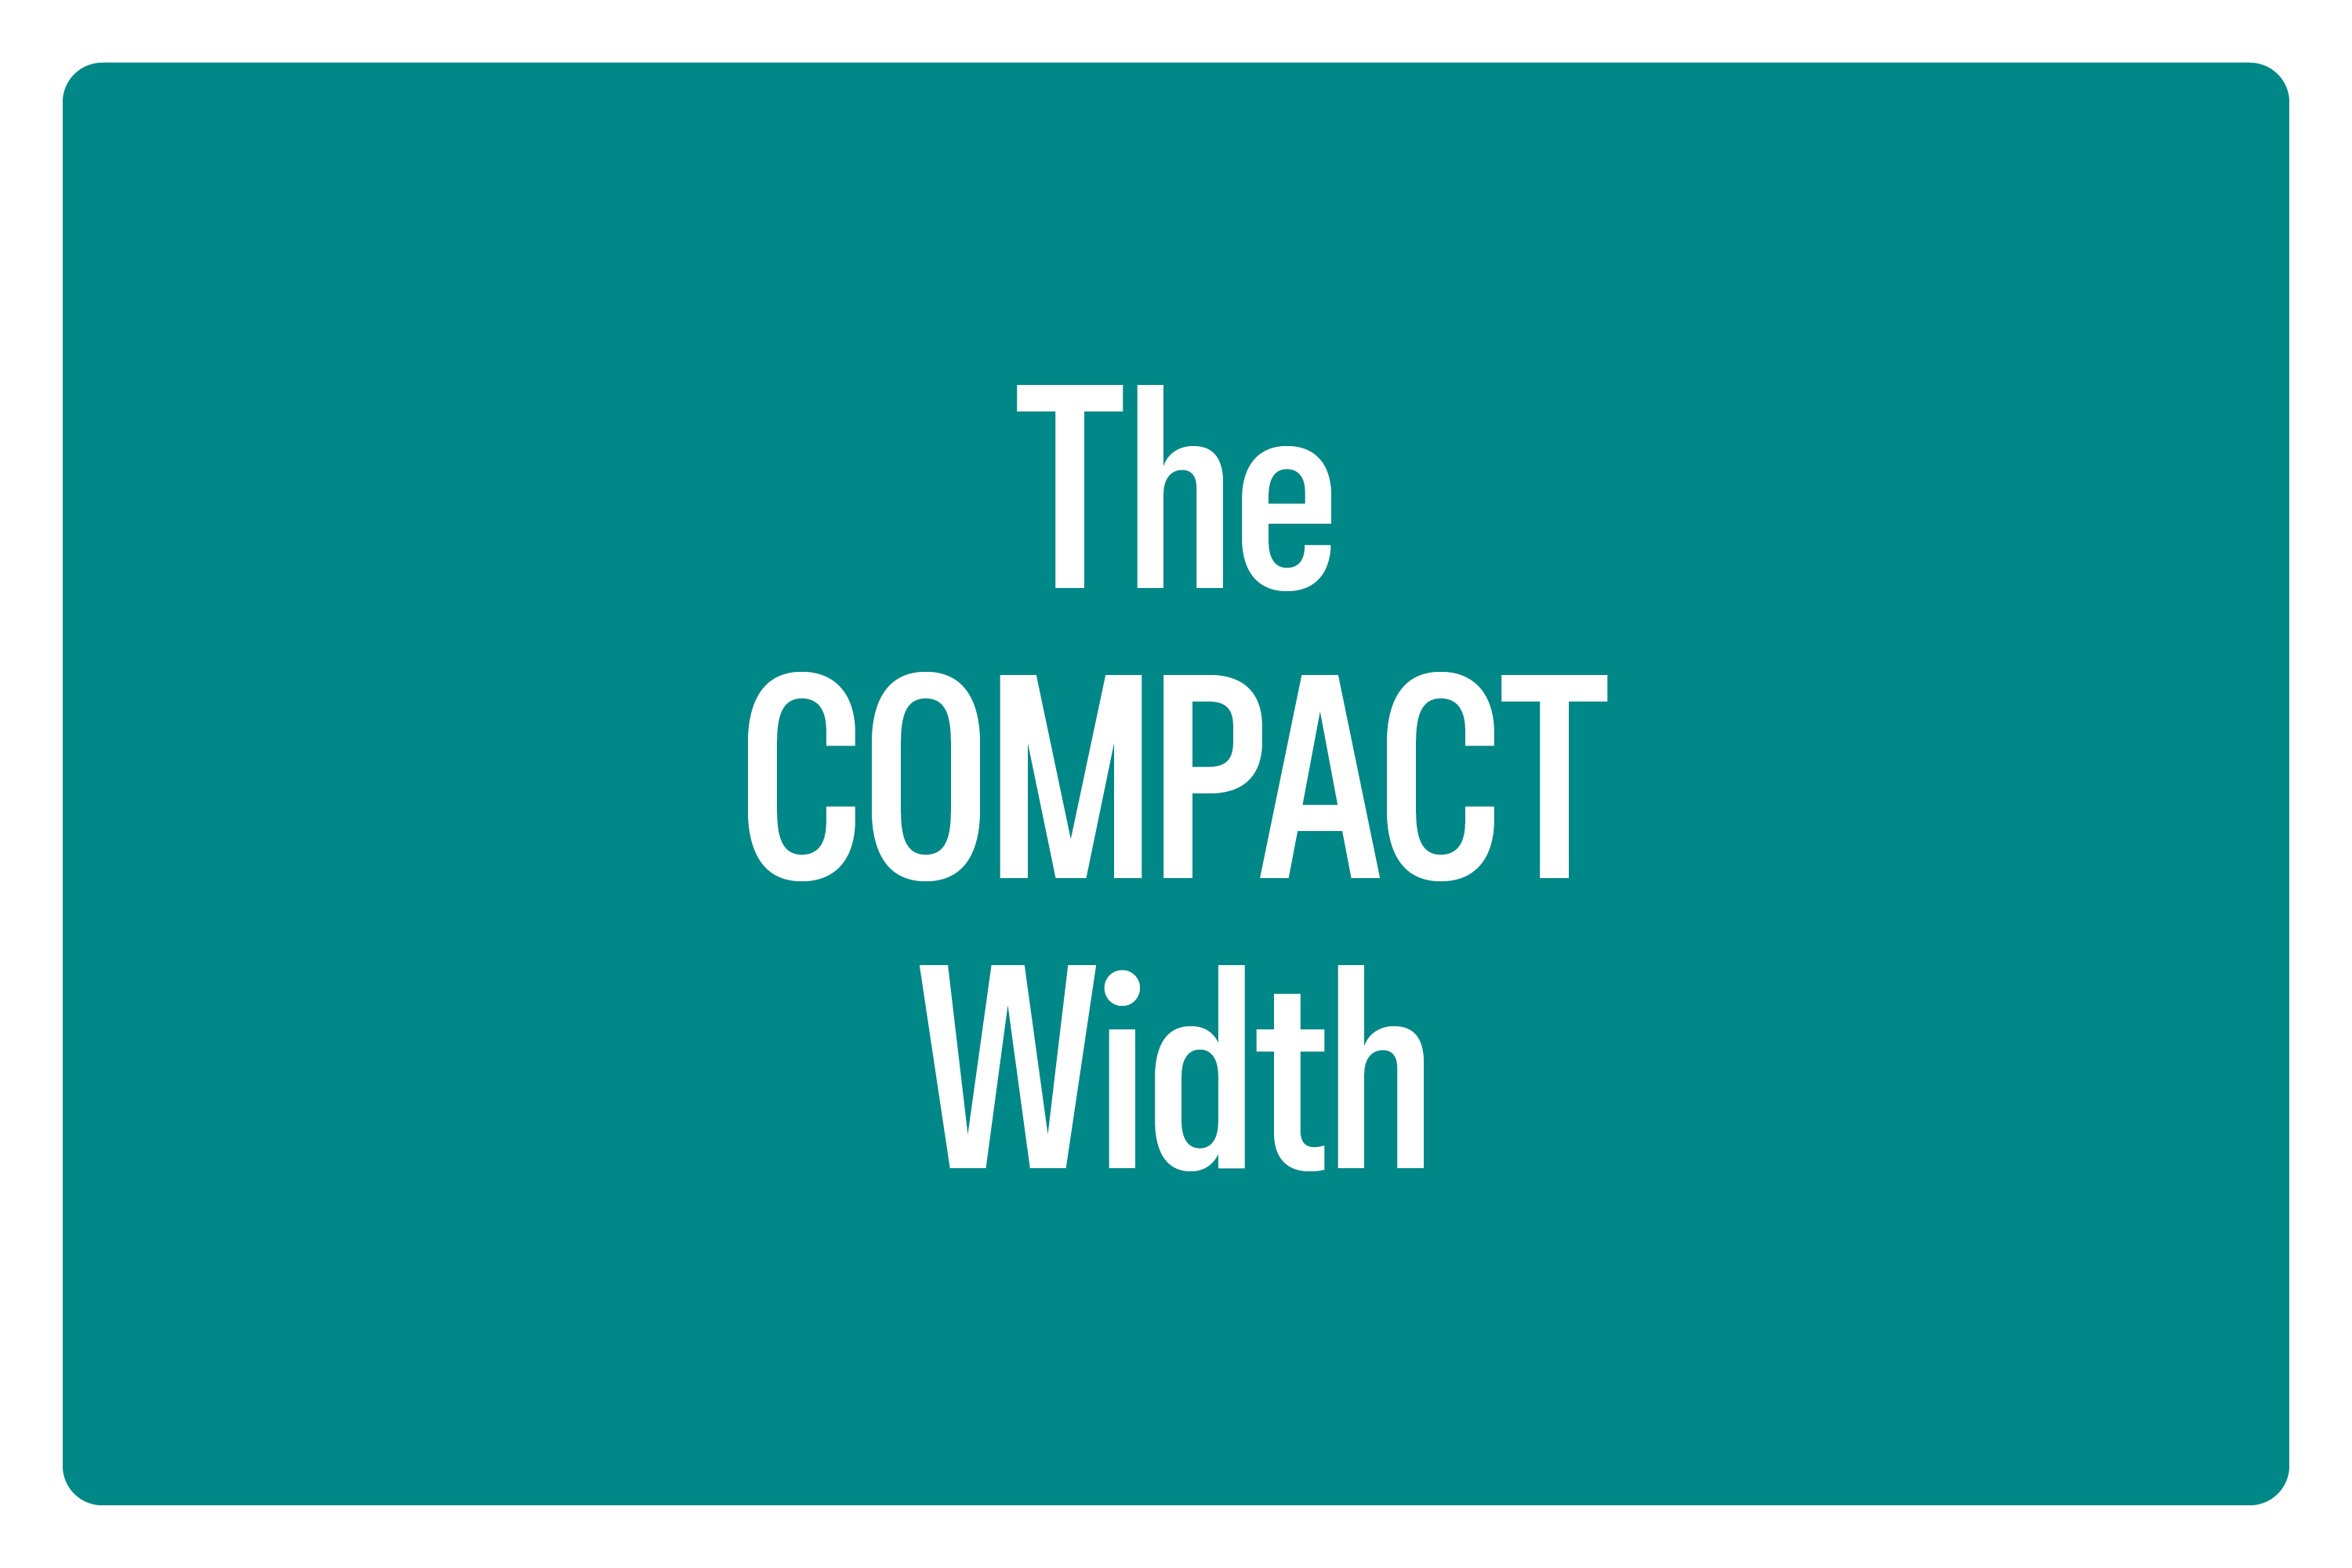 The COMPACT Width